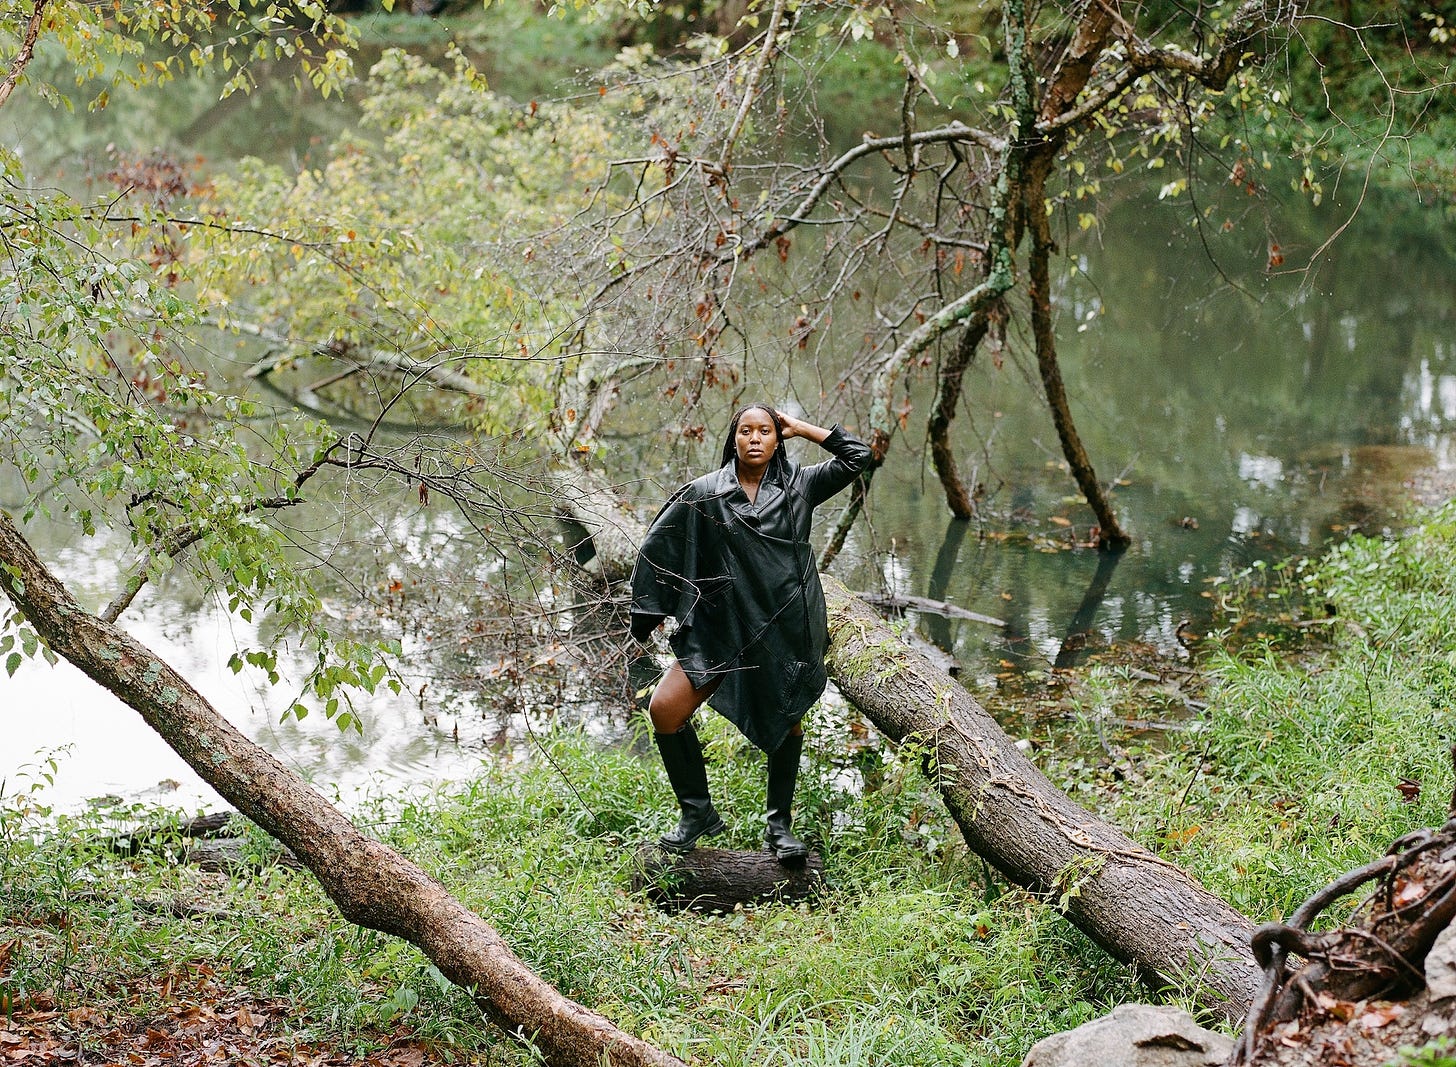 black woman wearing leather jacket/dress standing on a log at the edge of a pond